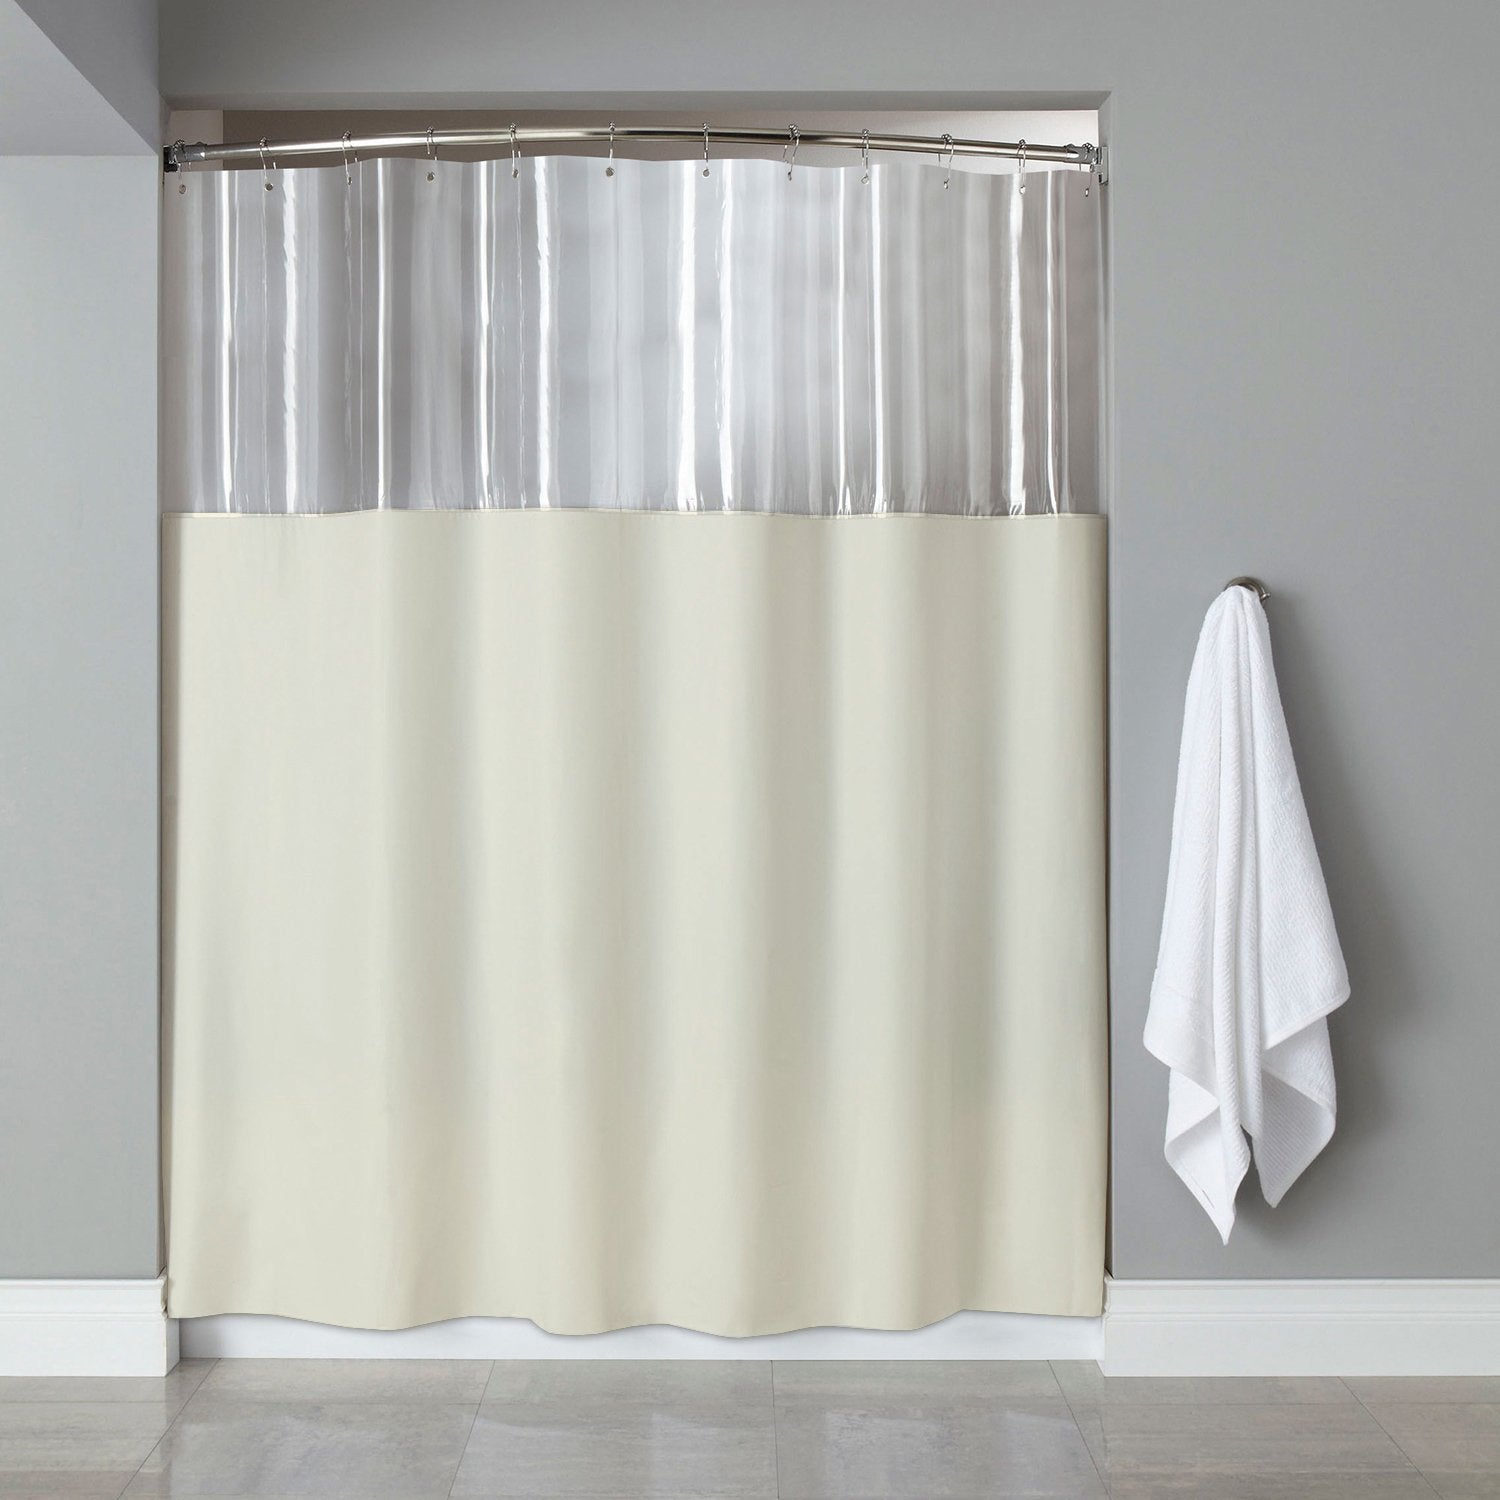 See Through Shower Curtain Ivory - Ivory